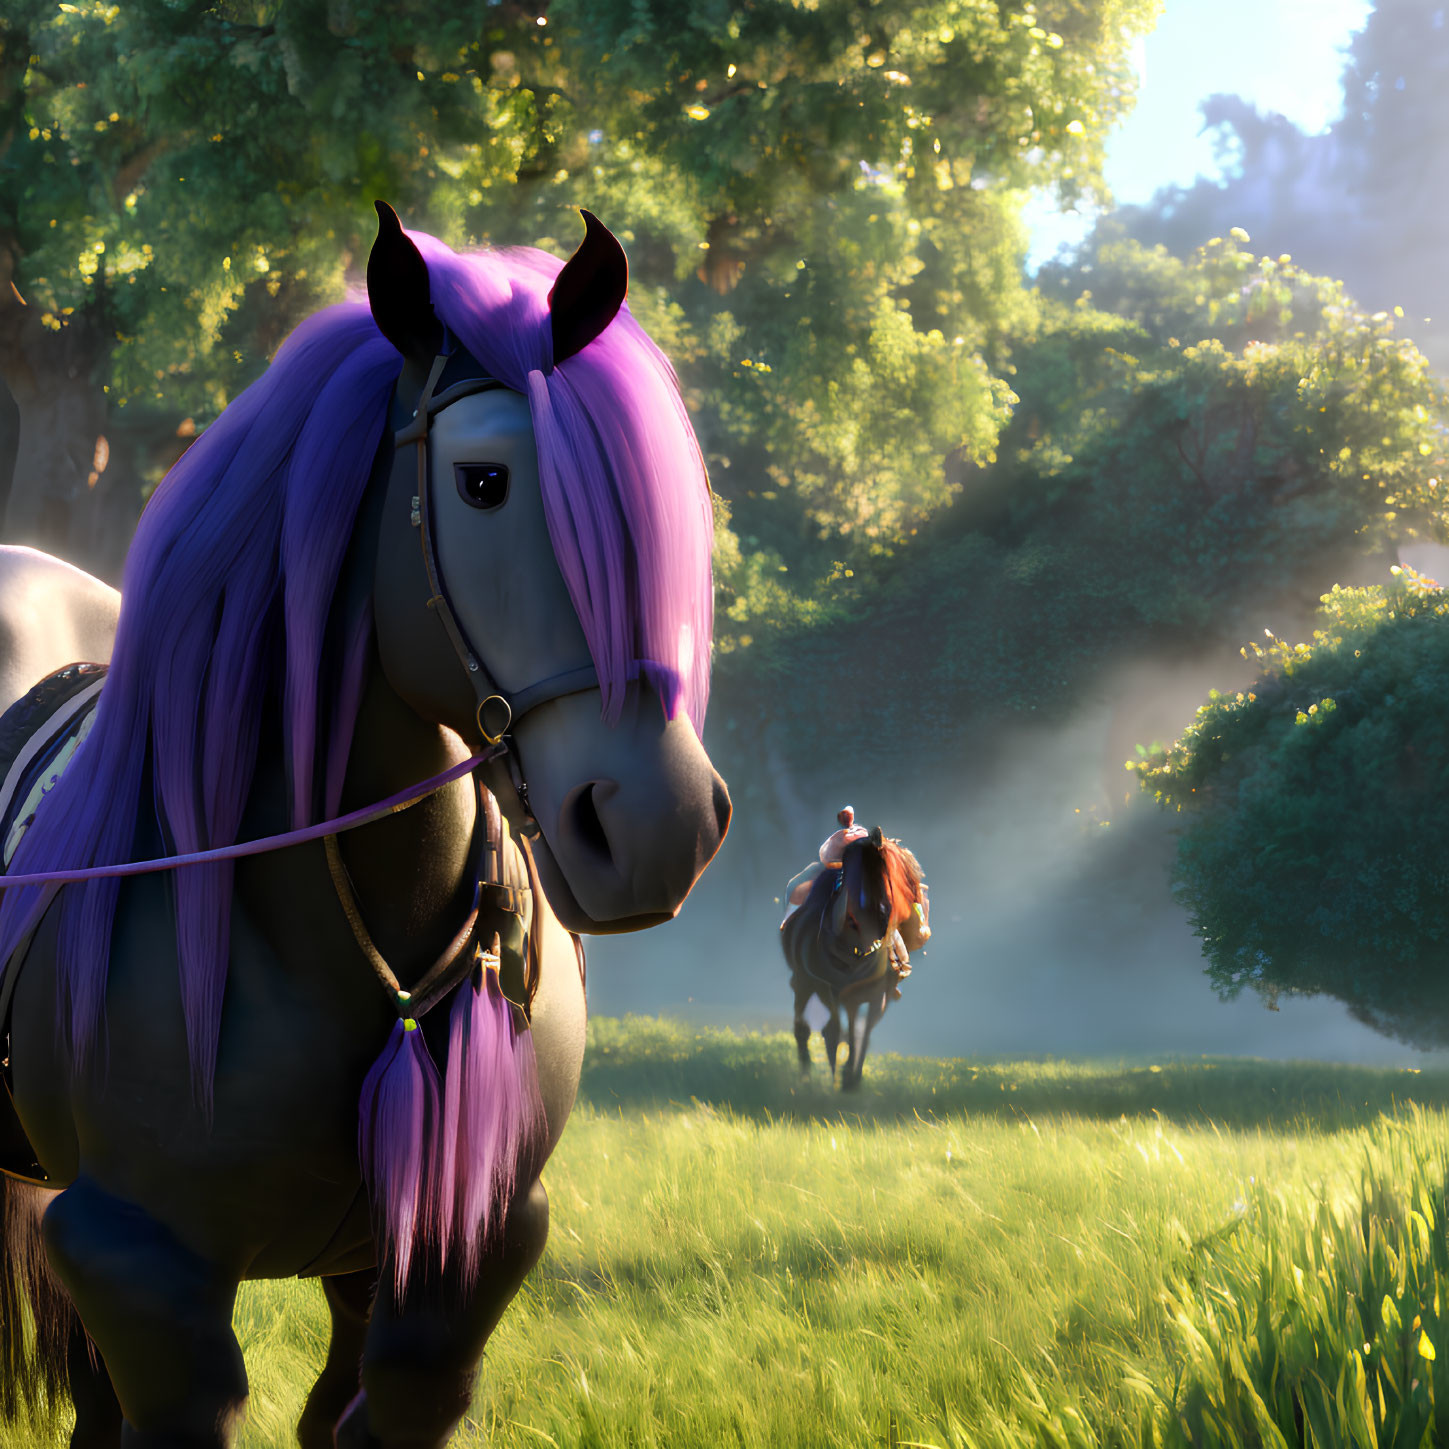 Purple-haired horse in sunlit forest with misty background horse